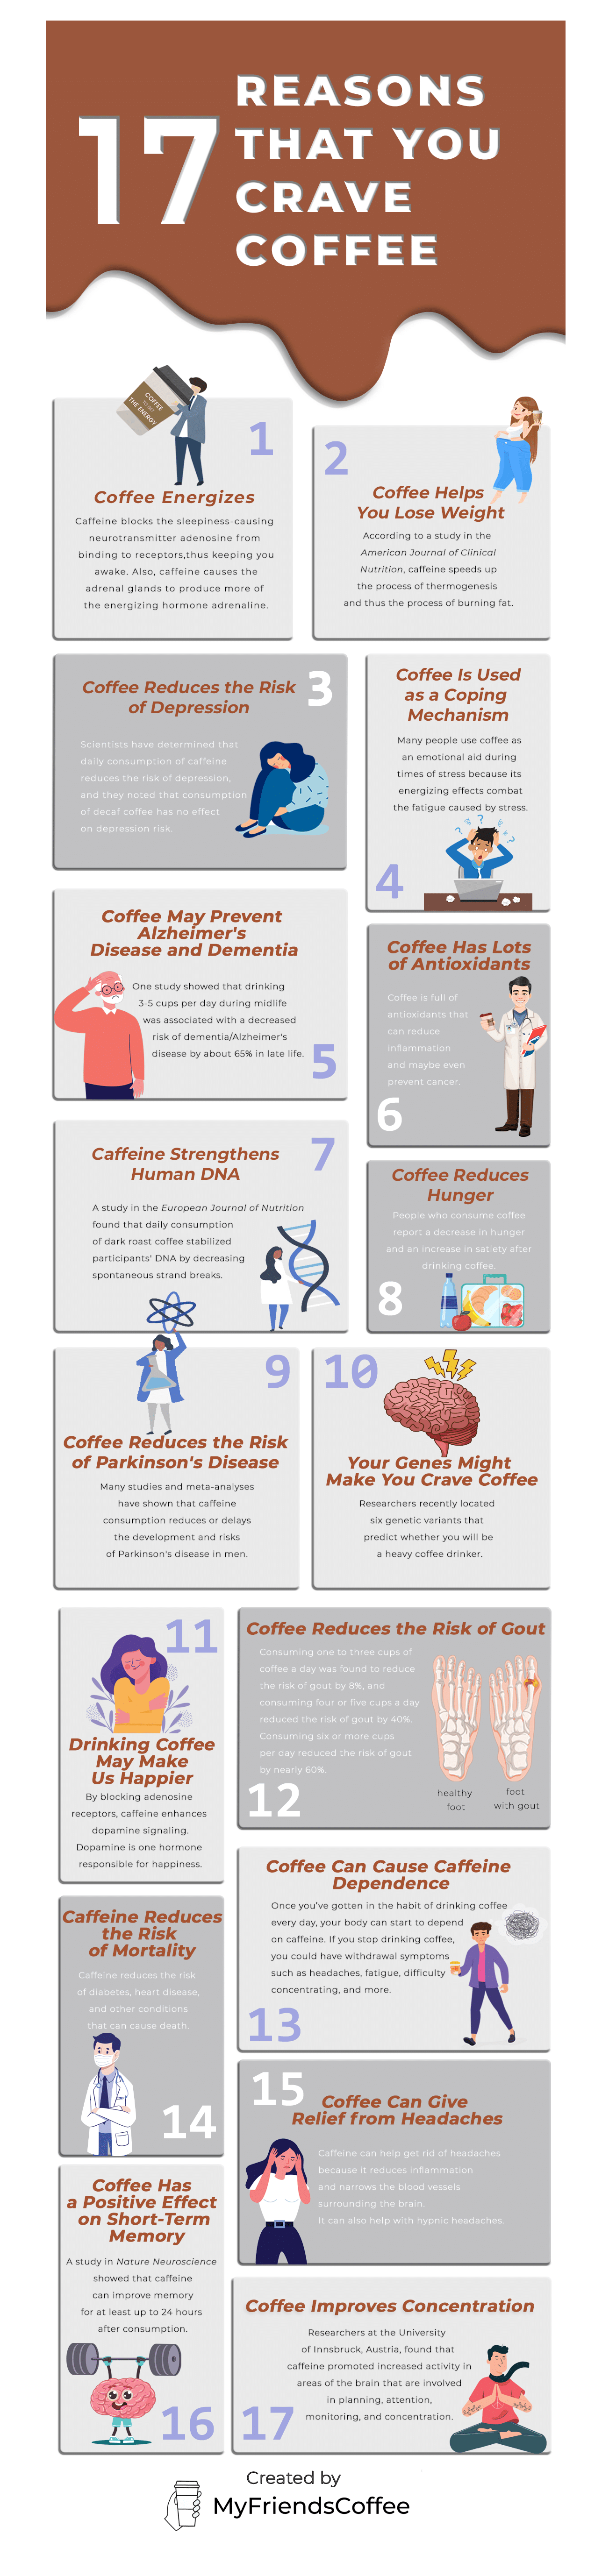 Reasons That You Crave Coffee [Infographic]